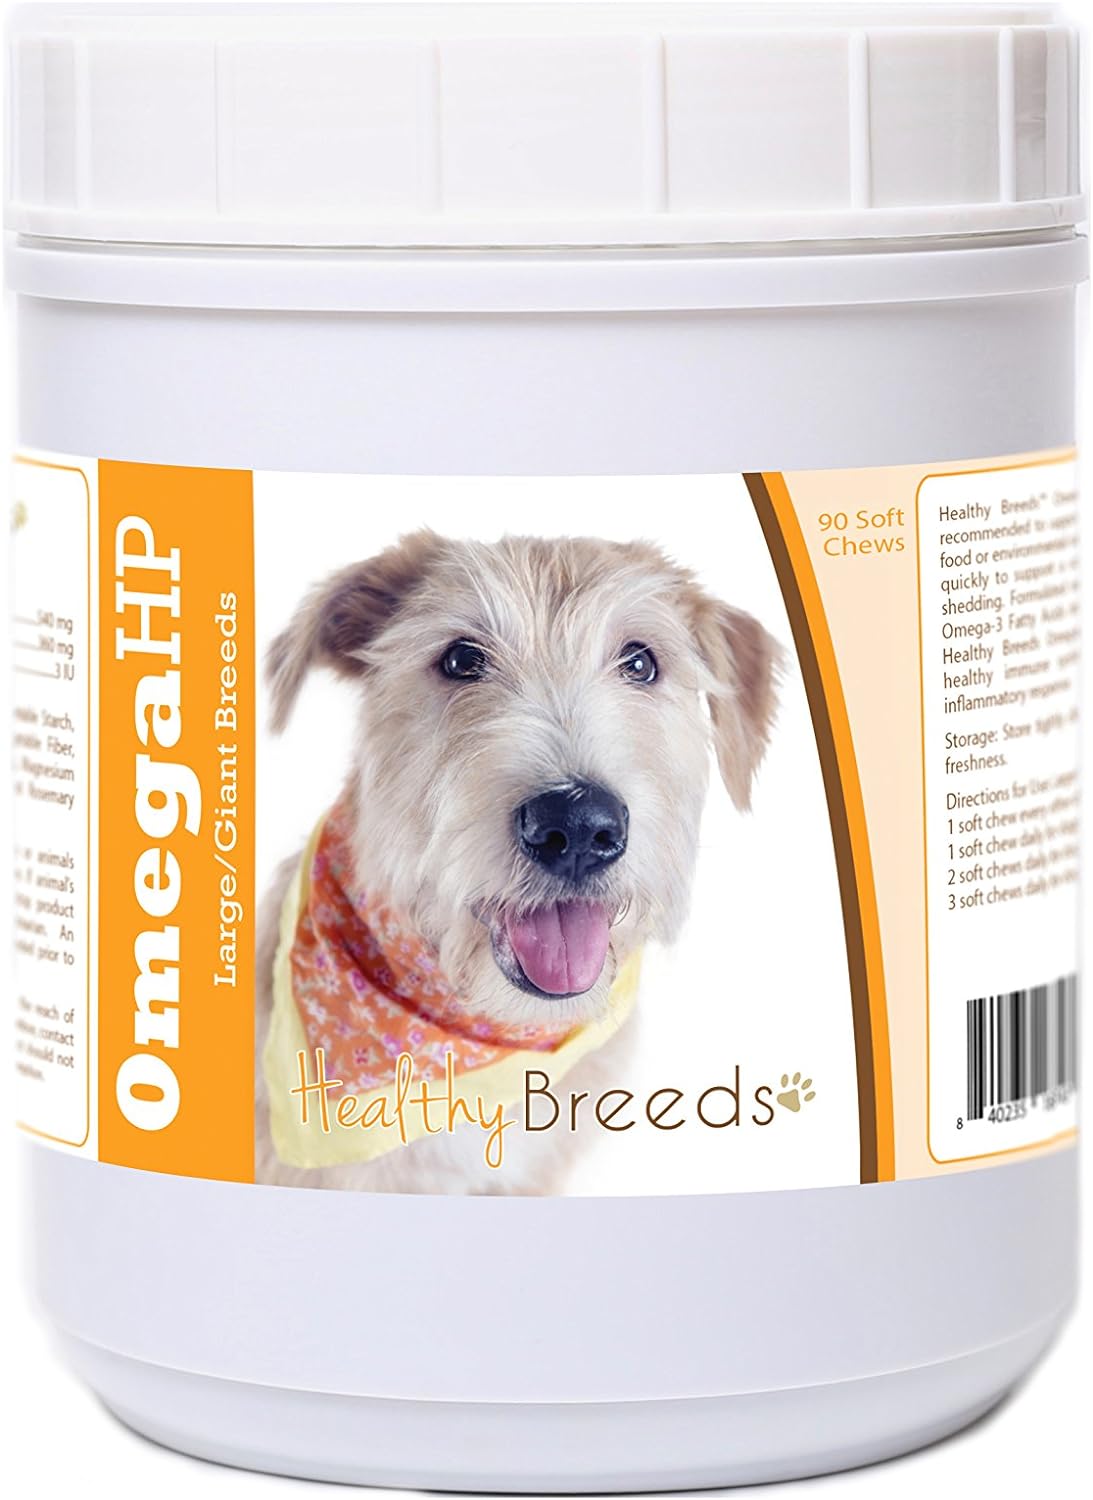 Healthy Breeds Glen of Imaal Terrier Omega HP Fatty Acid Skin and Coat Support Soft Chews 90 Count